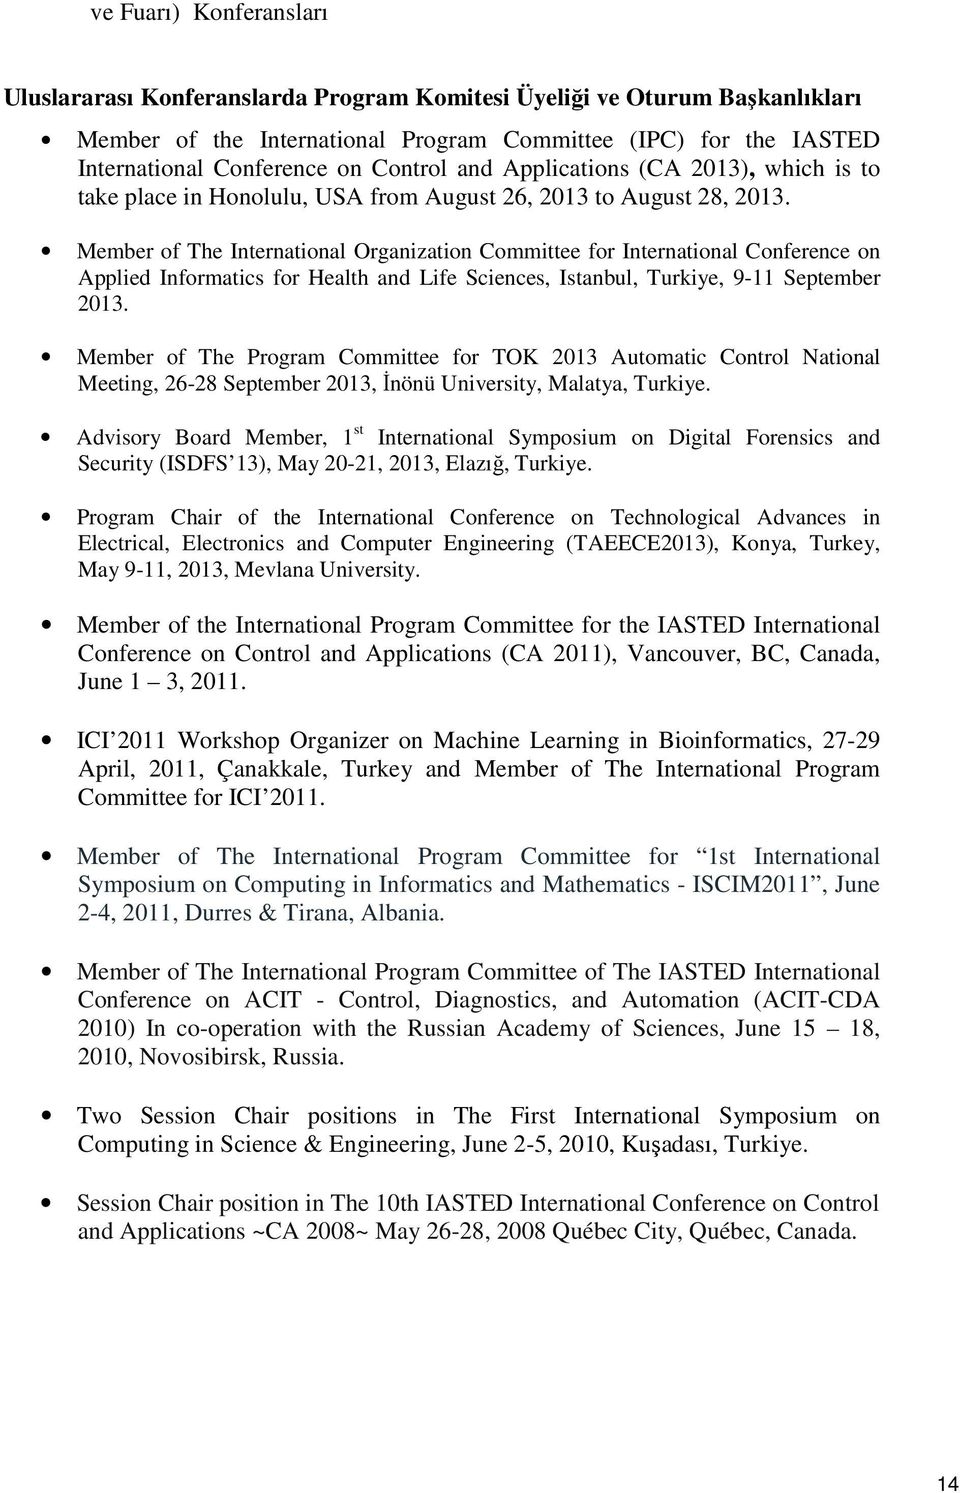 Member of The International Organization Committee for International Conference on Applied Informatics for Health and Life Sciences, Istanbul, Turkiye, 9-11 September 2013.